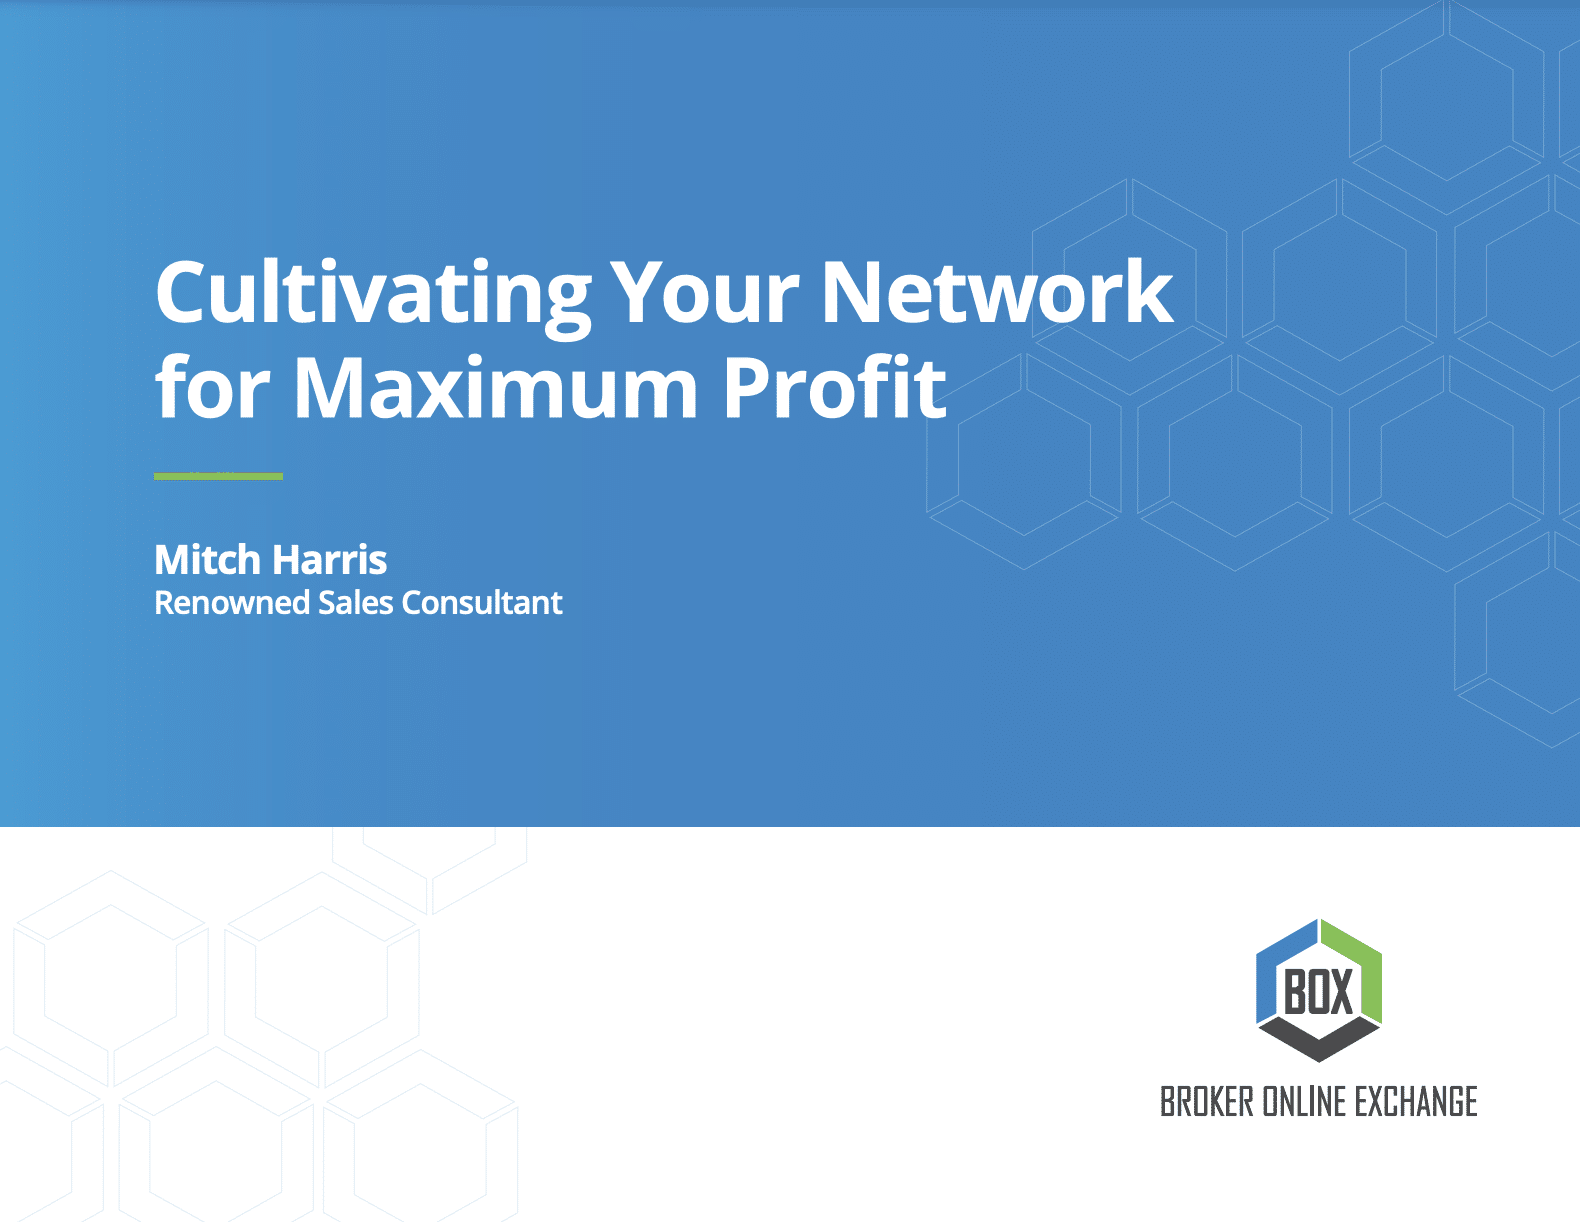 Cultivate Your Network